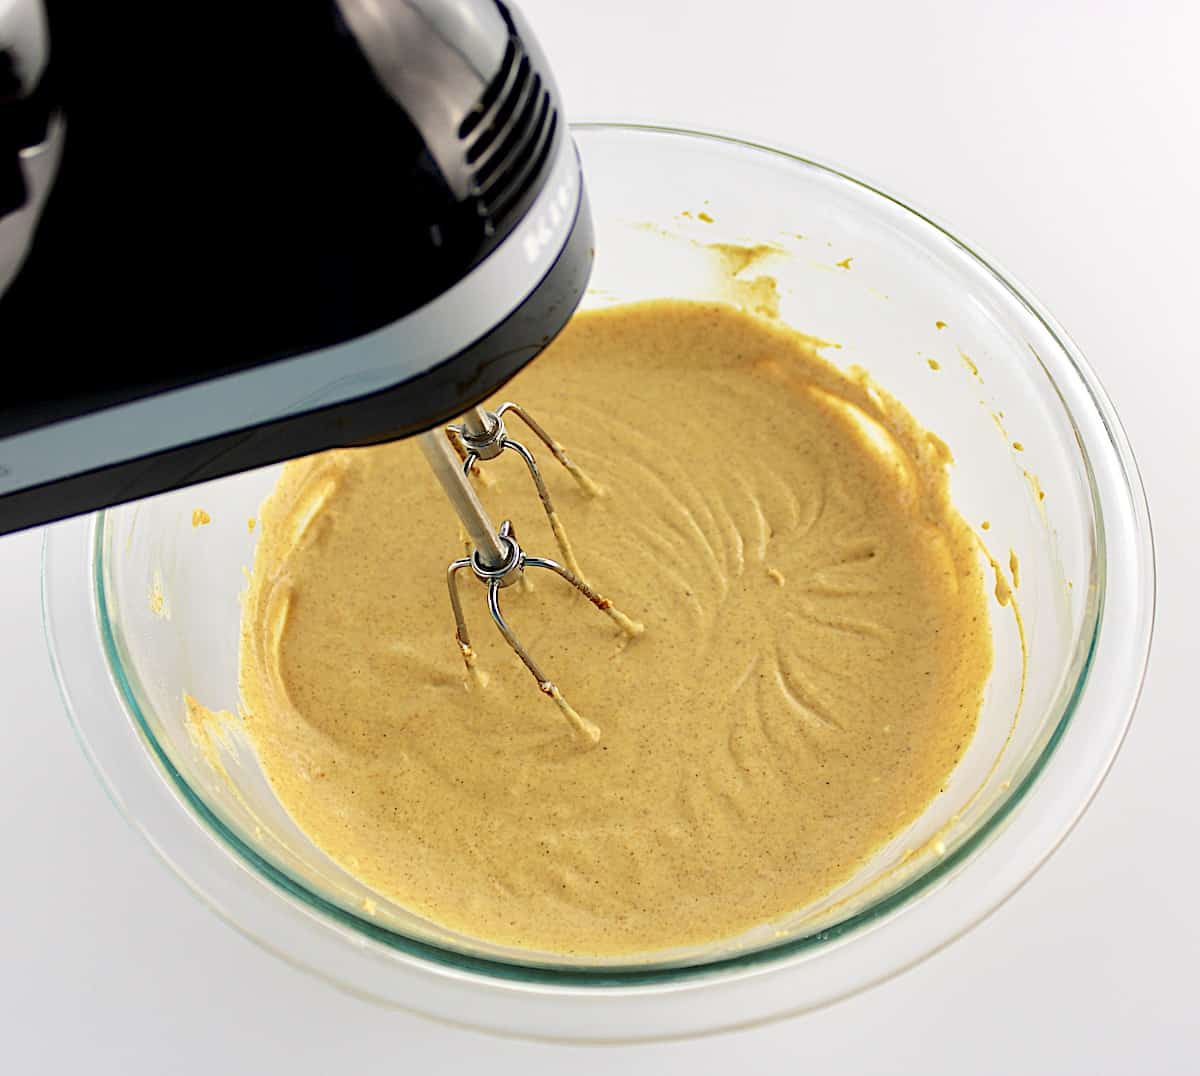 Keto Pumpkin Cheesecake Bars batter being mixed with hand mixer in glass bowl